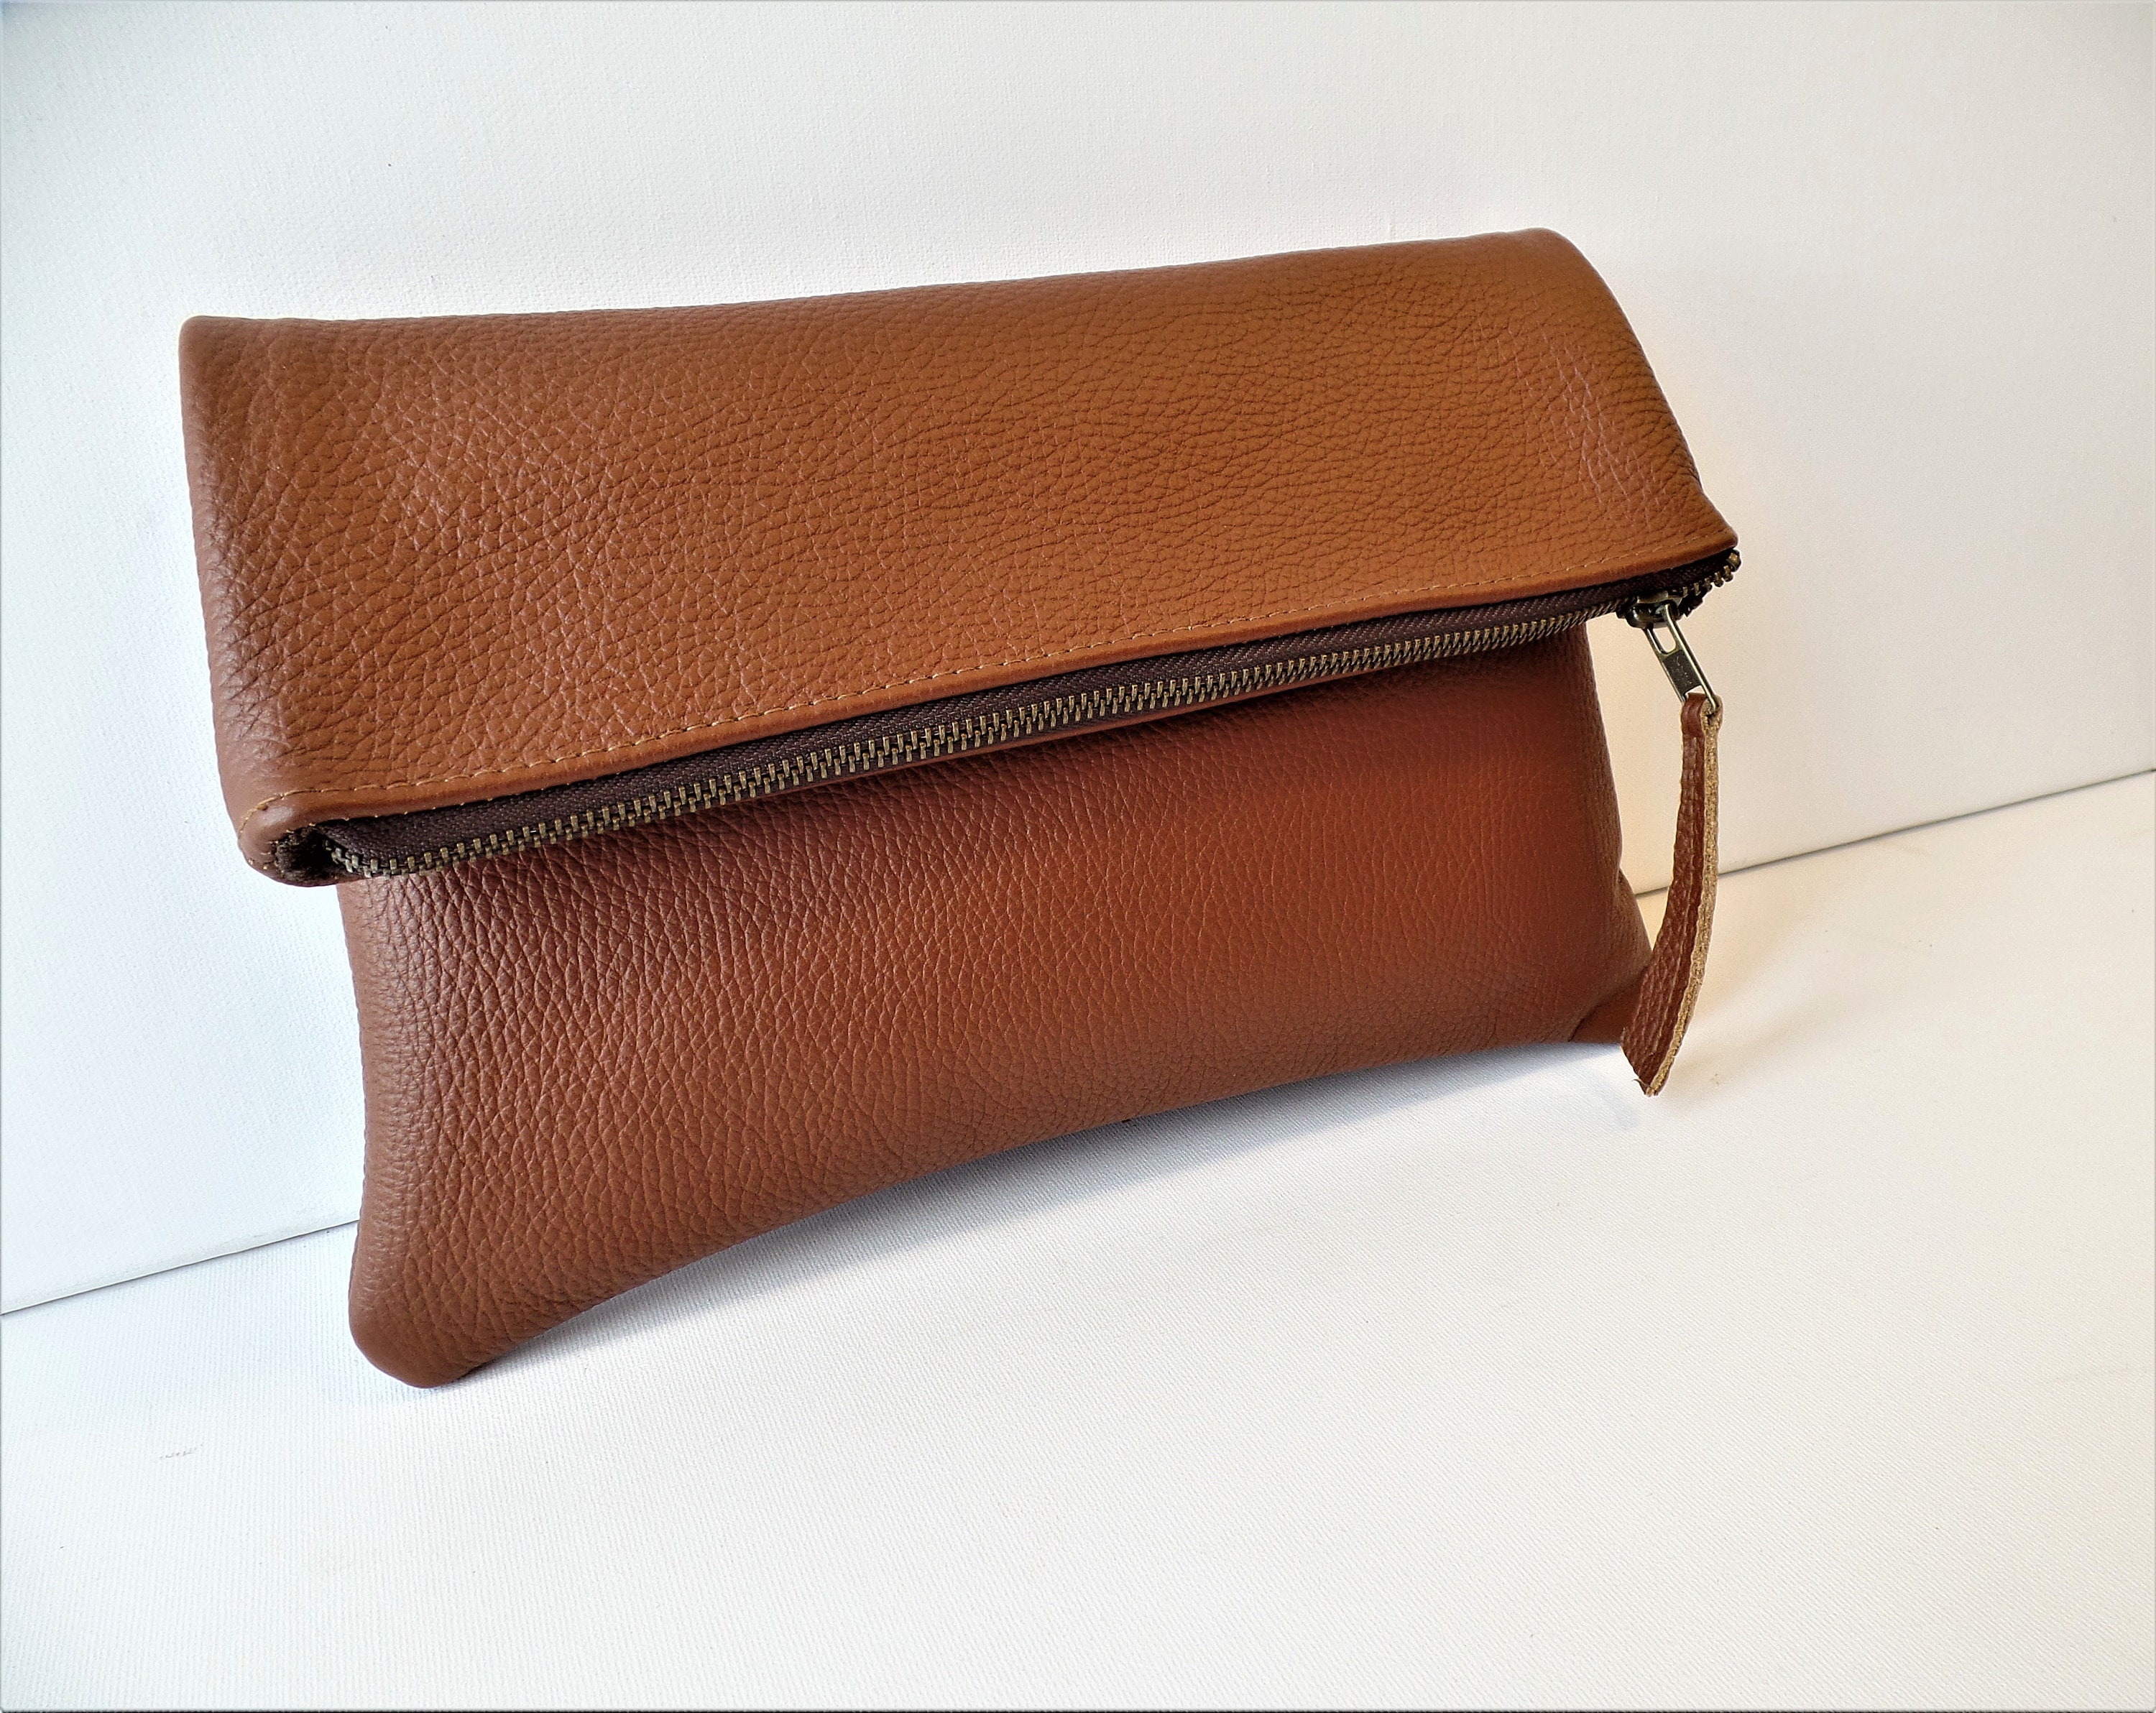 Real Leather Clutch Bag Genuine Leather Foldover Clutch Bag - Etsy